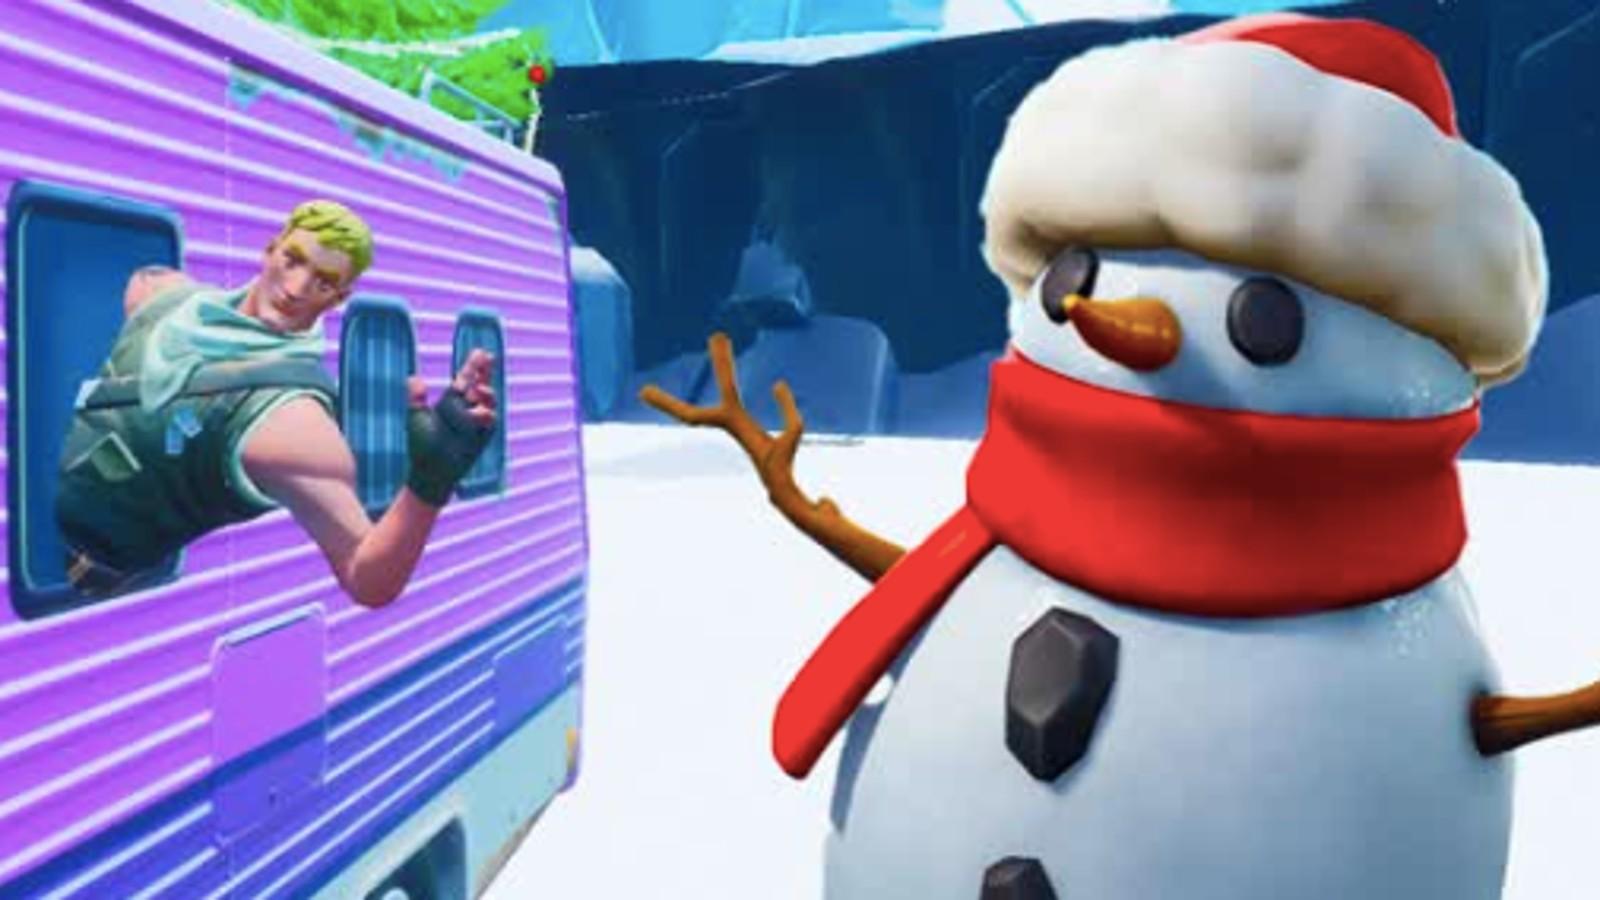 A snowman and fortnite character in the snow